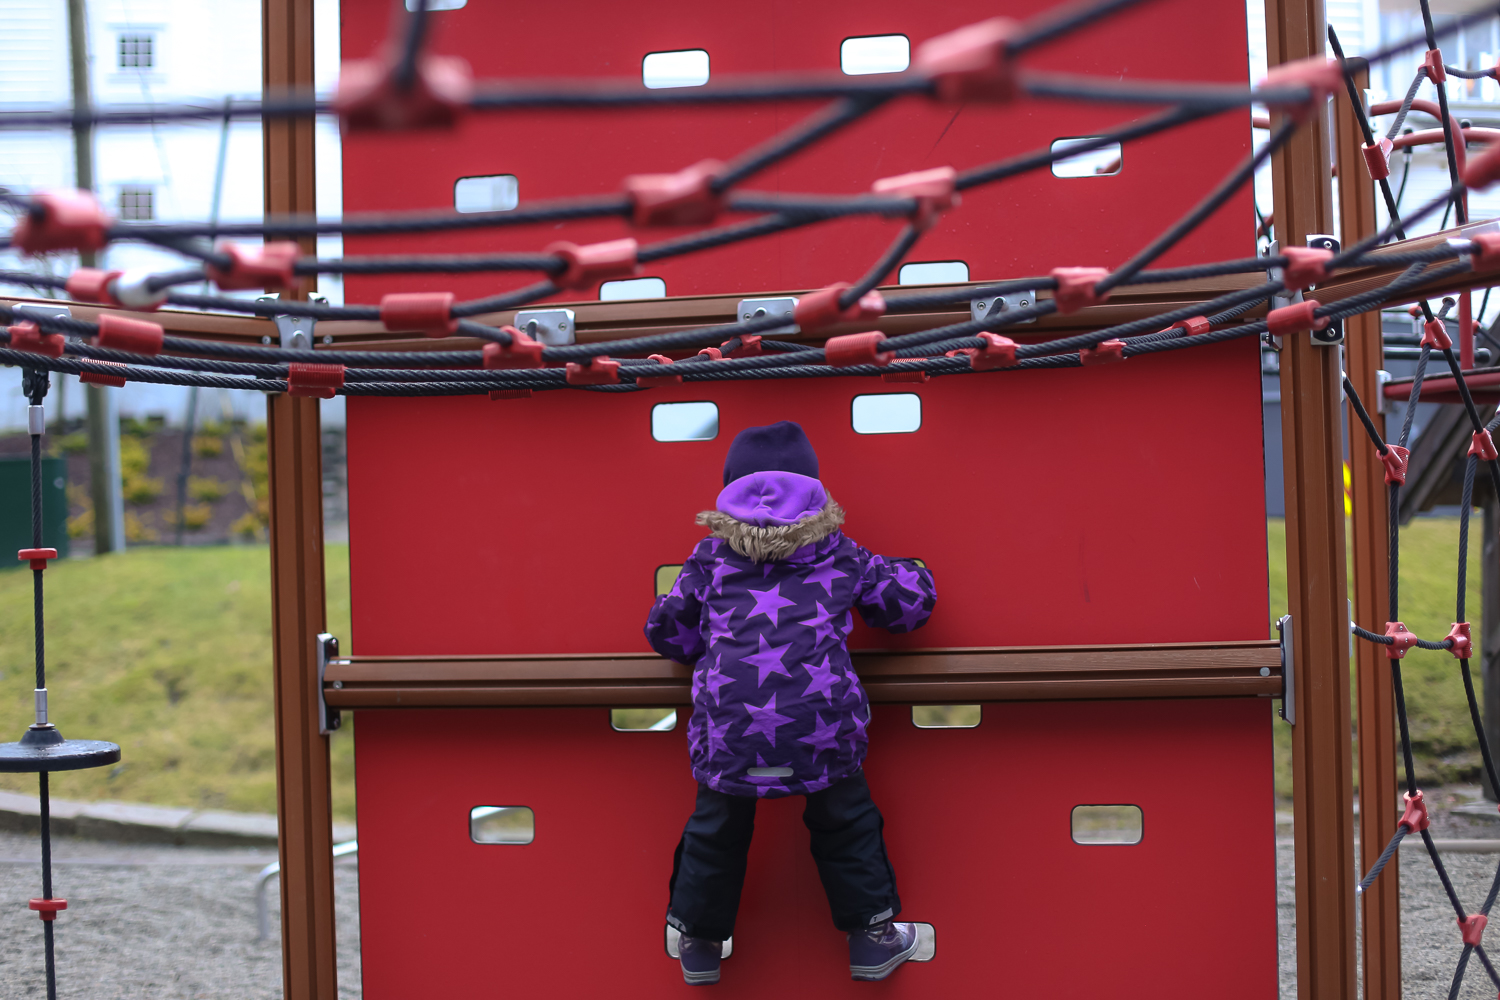 Exploring playgrounds, trolls, and a forest hike with toddlers and children in Bergen, Norway